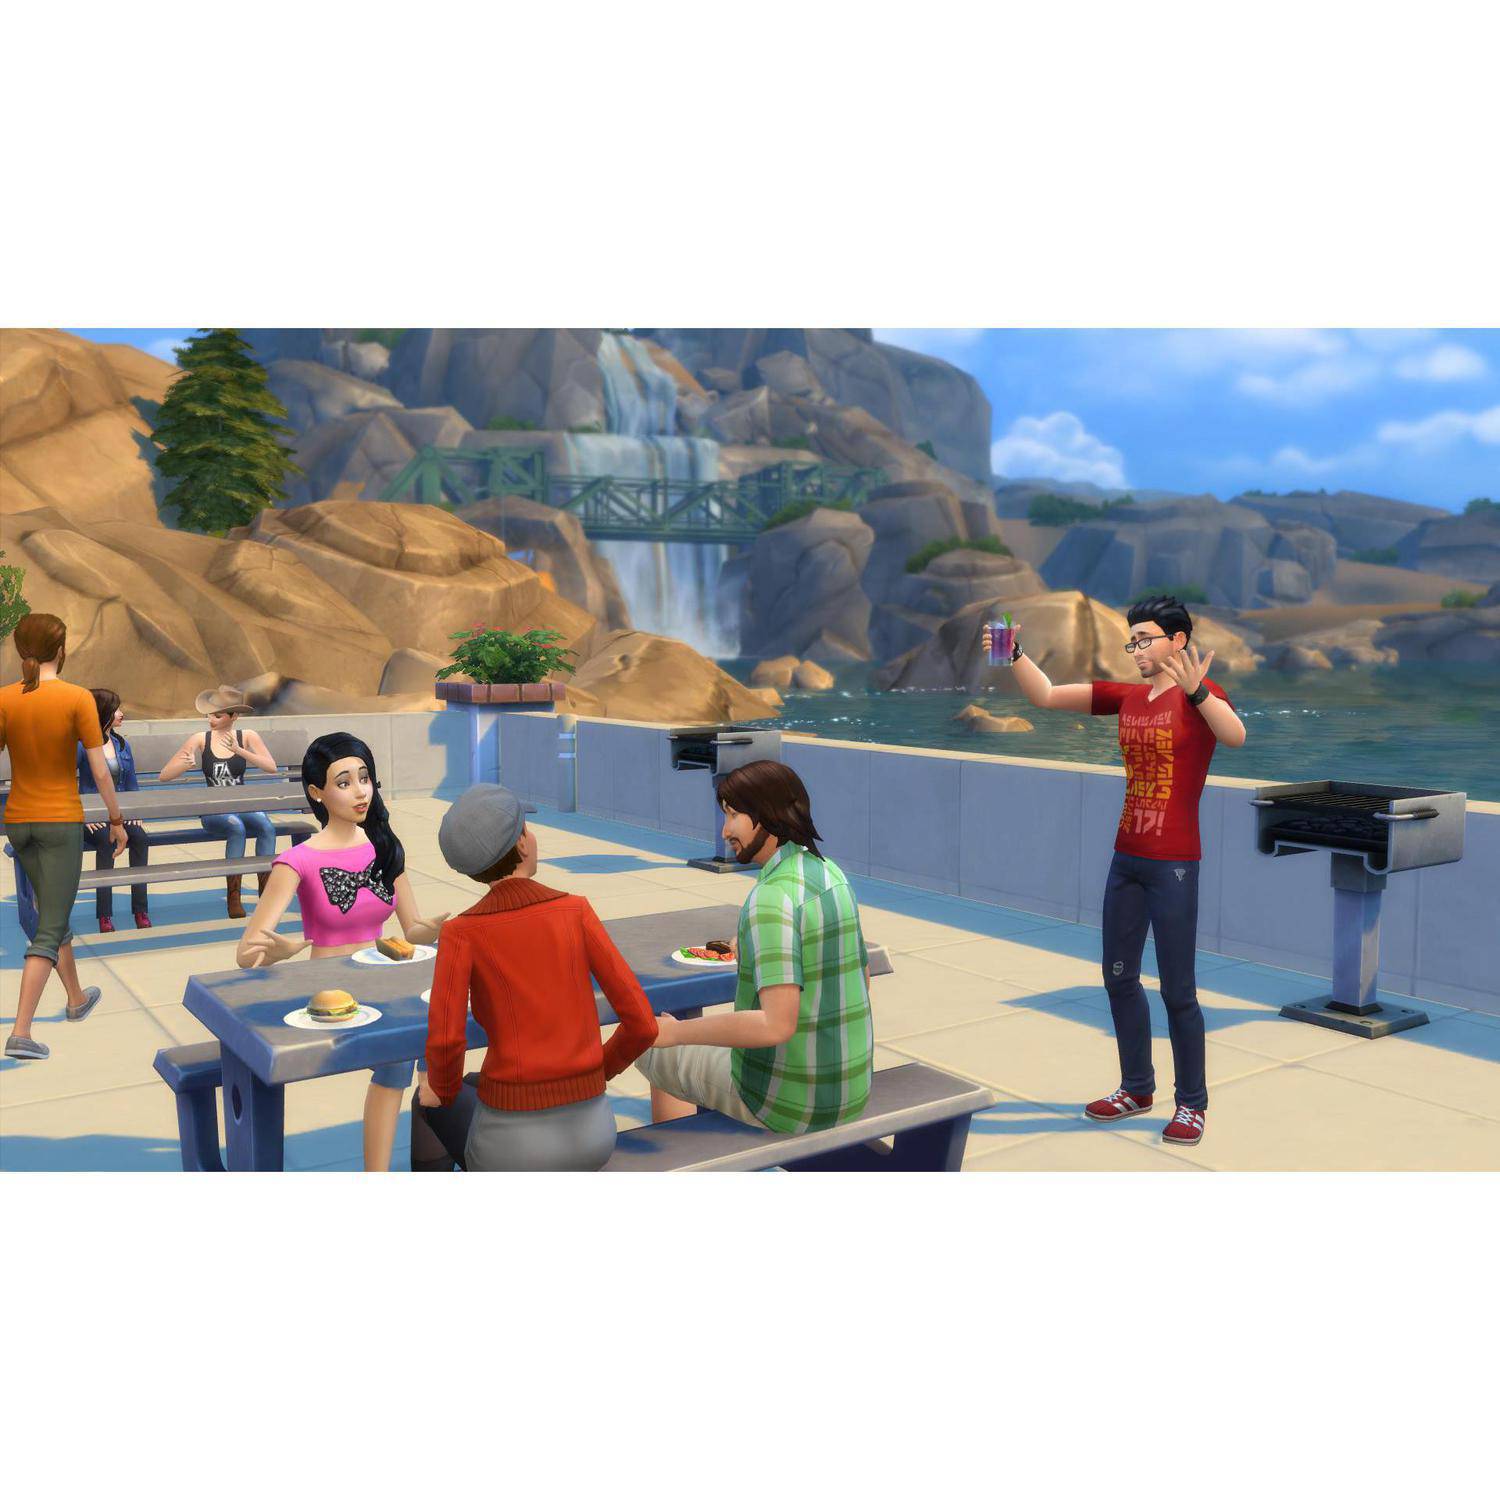 The Sims 4: Limited Edition, Electronic Arts, PC, Mac, [Physical], 014633730371 - image 12 of 16